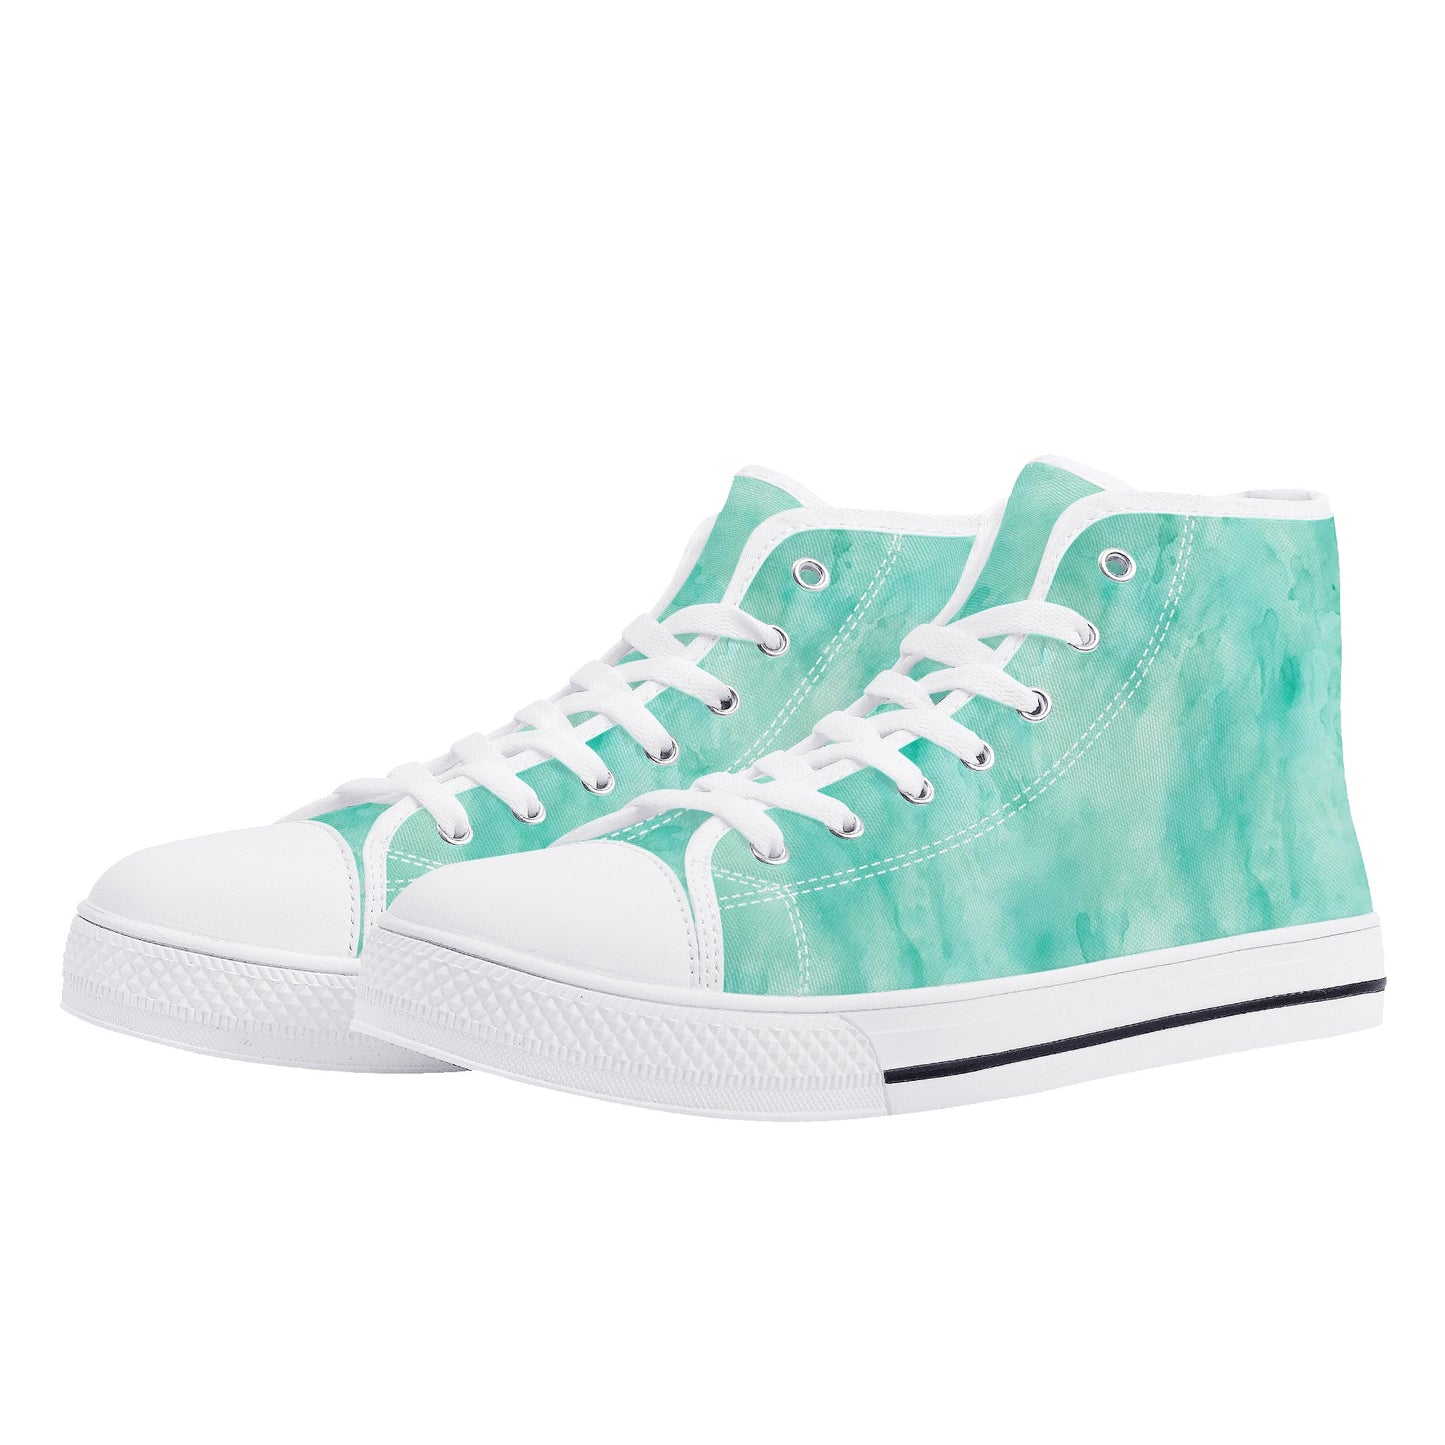 Teal Women High Top Shoes, Watercolor Green Lace Up Sneakers Footwear Canvas Streetwear Ladies Girls White Trainers Designer Gift Starcove Fashion